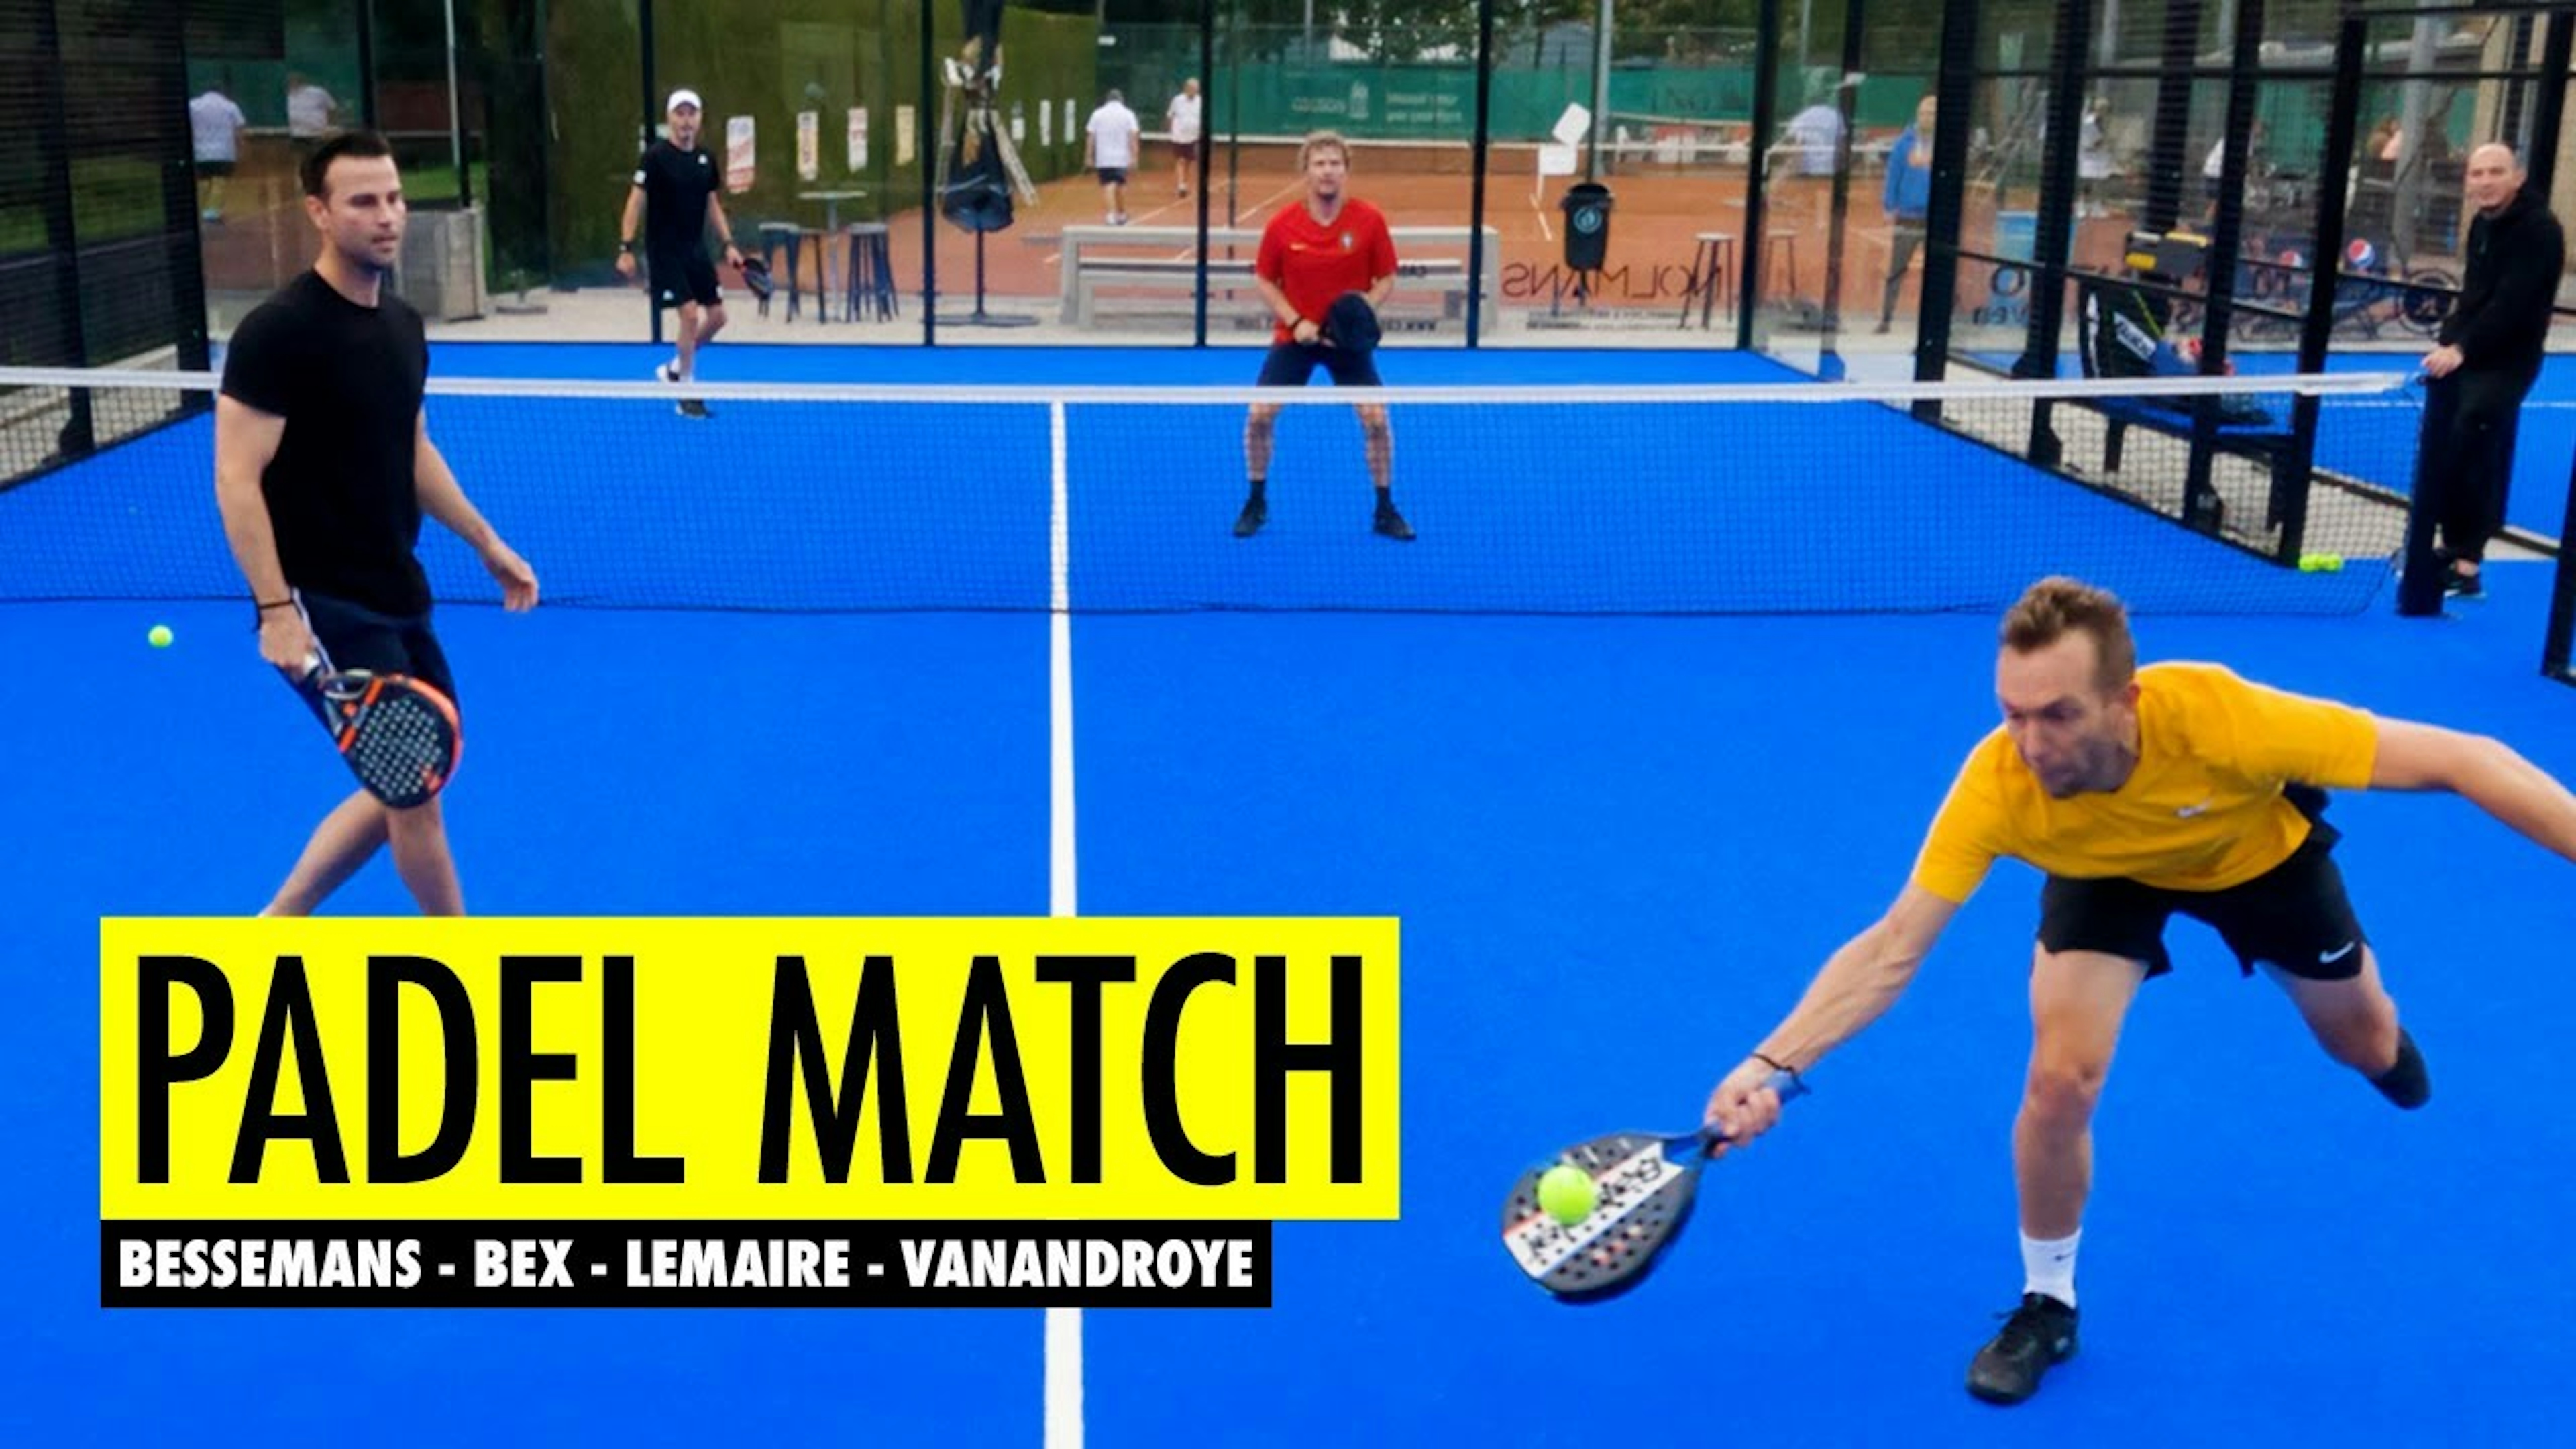 Padel Match: Bessemans - Bex - Lemaire - Vanandroye | Andy Lemaire